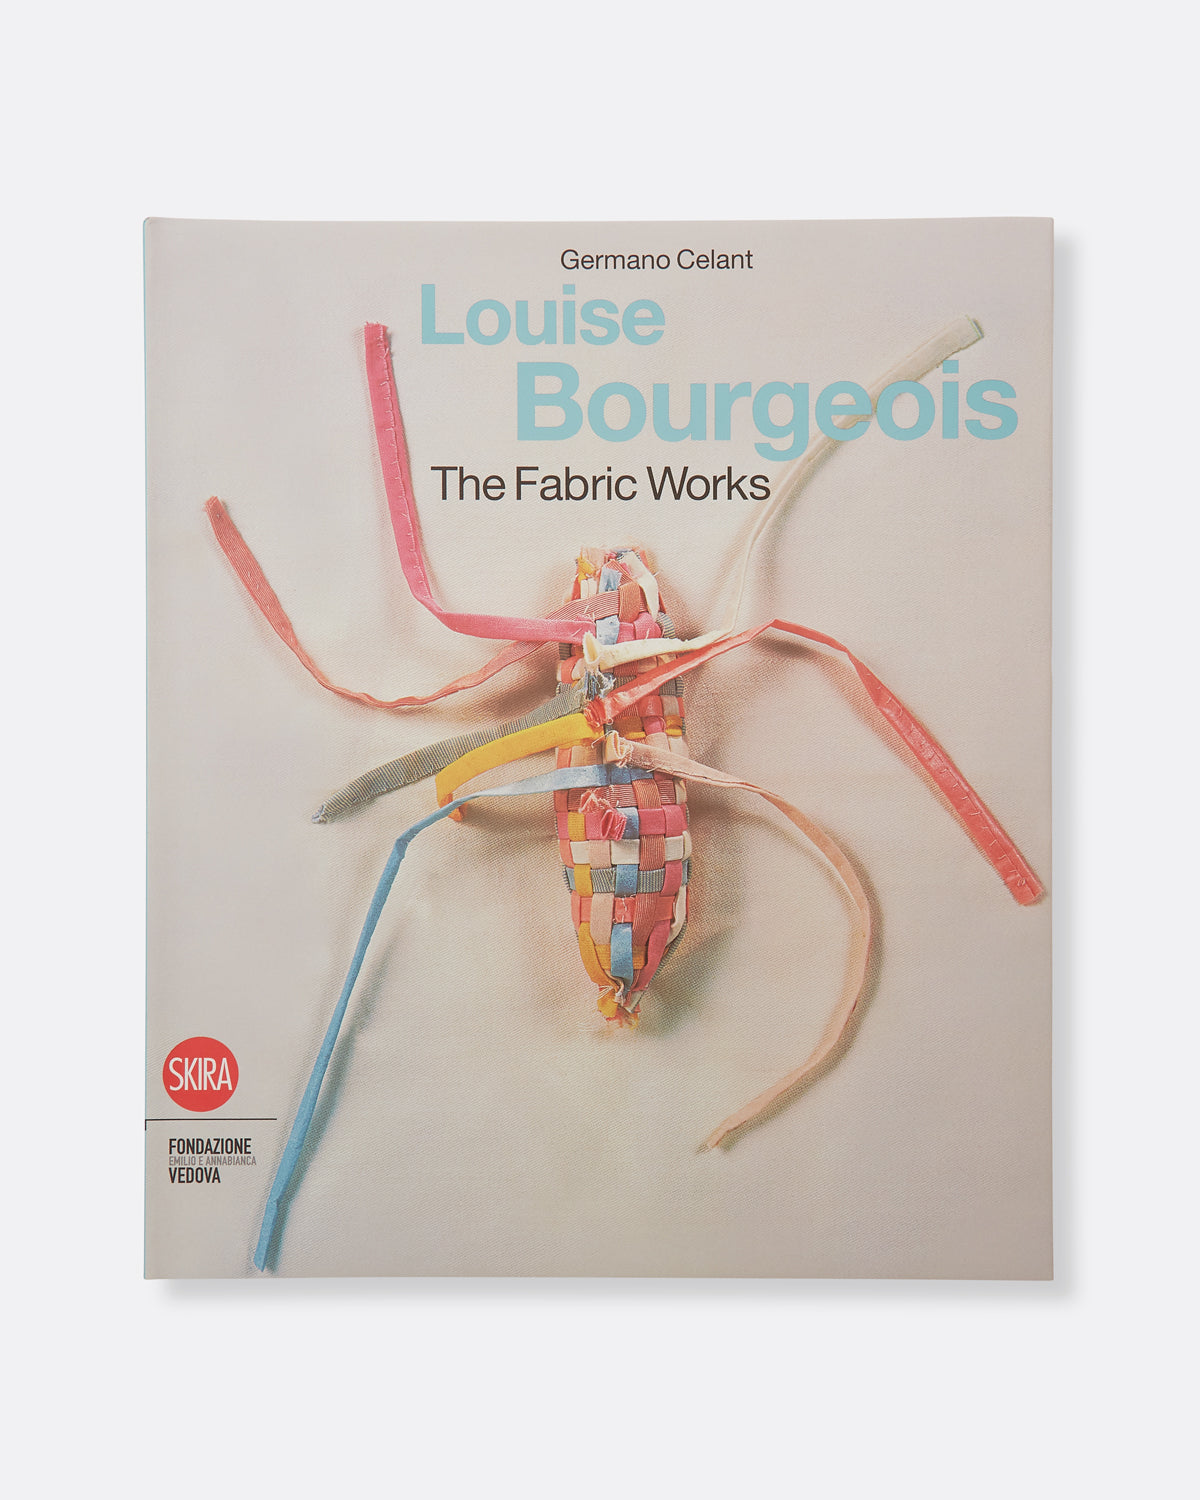 Louise Bourgeois: The Fabric Works